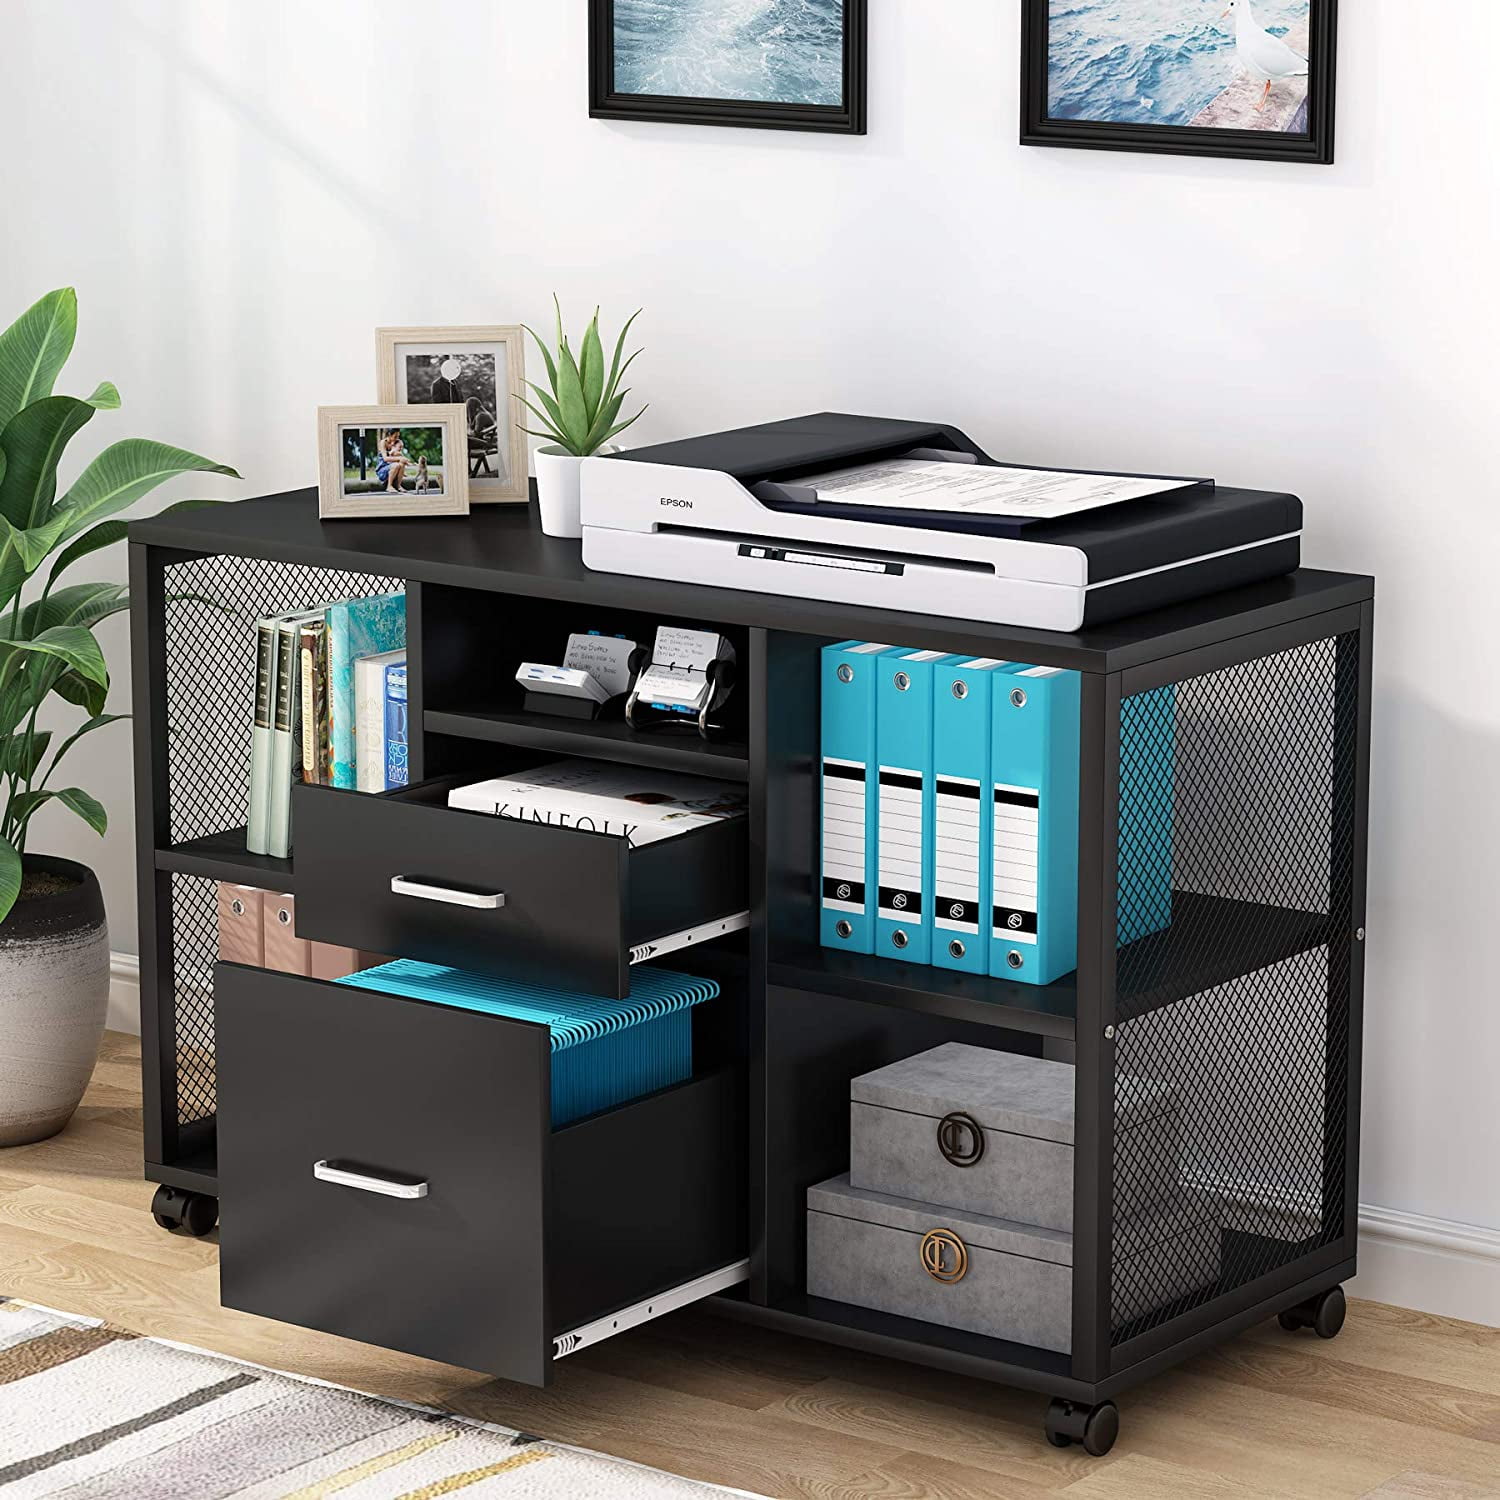 Printer Stand with Storage Filling Cabinet Office Storage Cabinet Organization for Letter Size with Wheels and Open Storage Shelves for Home Office 35W x 14D x 26H File Cabinets for Home Office 